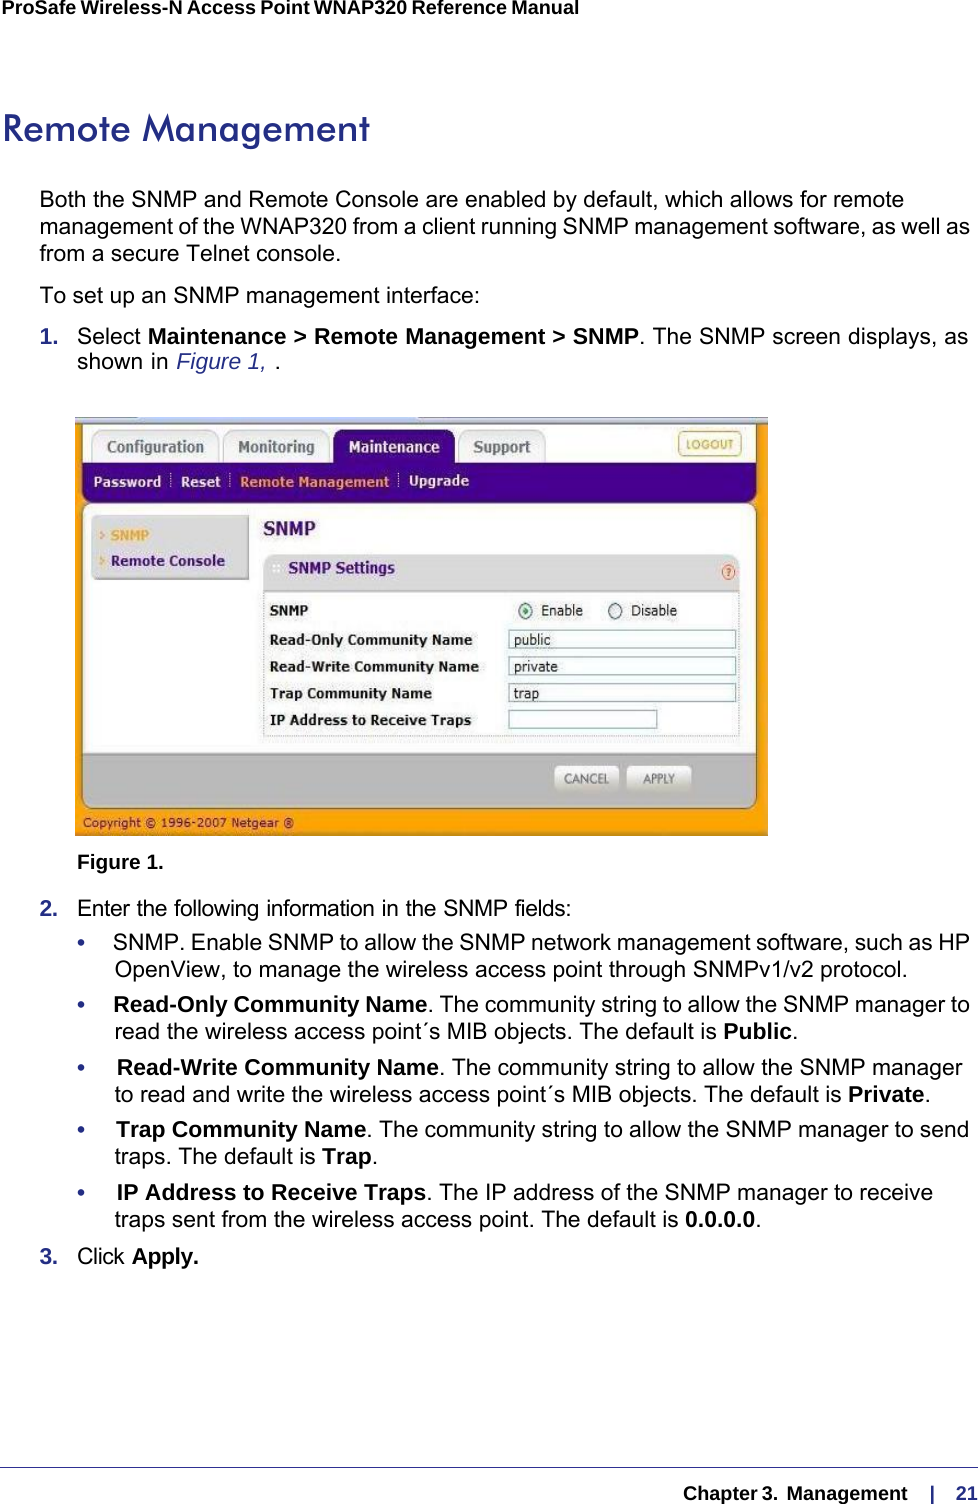   Chapter 3.  Management     |    21ProSafe Wireless-N Access Point WNAP320 Reference Manual Remote ManagementBoth the SNMP and Remote Console are enabled by default, which allows for remote management of the WNAP320 from a client running SNMP management software, as well as from a secure Telnet console.To set up an SNMP management interface:1.  Select Maintenance &gt; Remote Management &gt; SNMP. The SNMP screen displays, as shown in Figure  1, . Figure 1.  2.  Enter the following information in the SNMP fields:•     SNMP. Enable SNMP to allow the SNMP network management software, such as HP OpenView, to manage the wireless access point through SNMPv1/v2 protocol. •     Read-Only Community Name. The community string to allow the SNMP manager to read the wireless access point´s MIB objects. The default is Public.•     Read-Write Community Name. The community string to allow the SNMP manager to read and write the wireless access point´s MIB objects. The default is Private.•     Trap Community Name. The community string to allow the SNMP manager to send traps. The default is Trap.•     IP Address to Receive Traps. The IP address of the SNMP manager to receive traps sent from the wireless access point. The default is 0.0.0.0.3.  Click Apply.